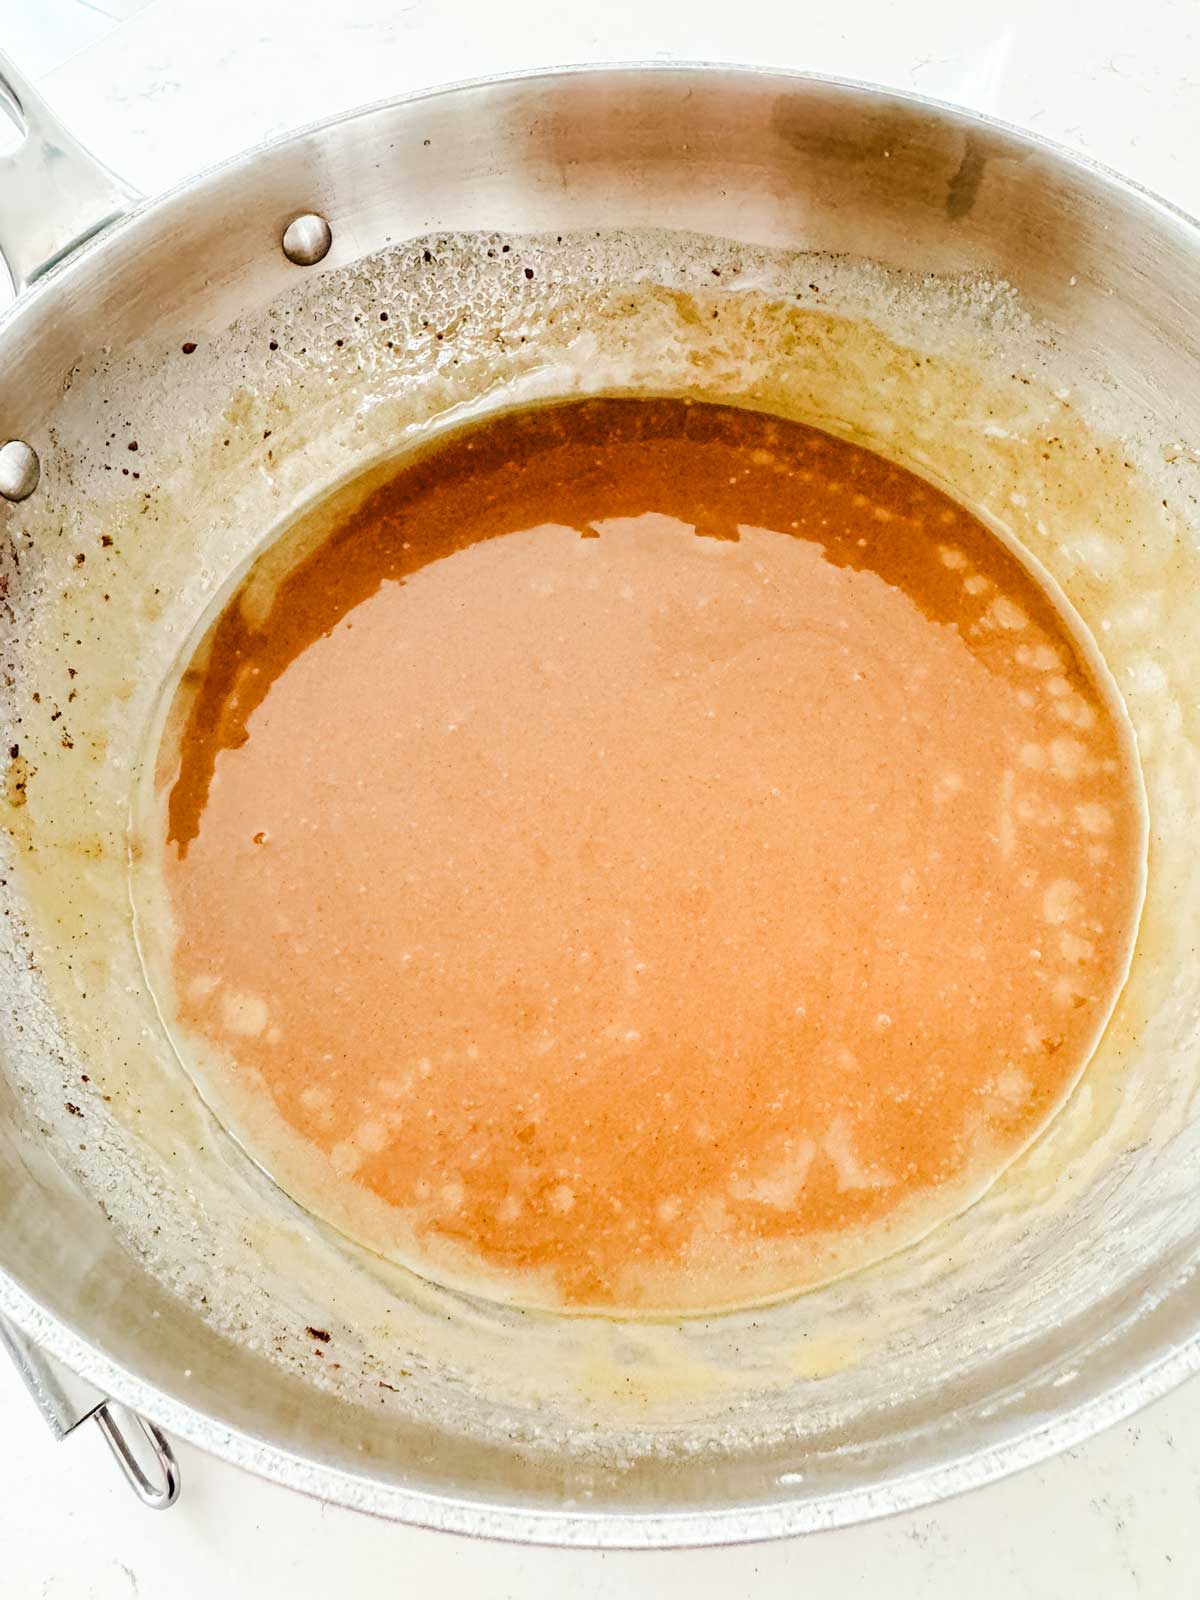 The base of banana sauce for pancakes in a sauce pan.